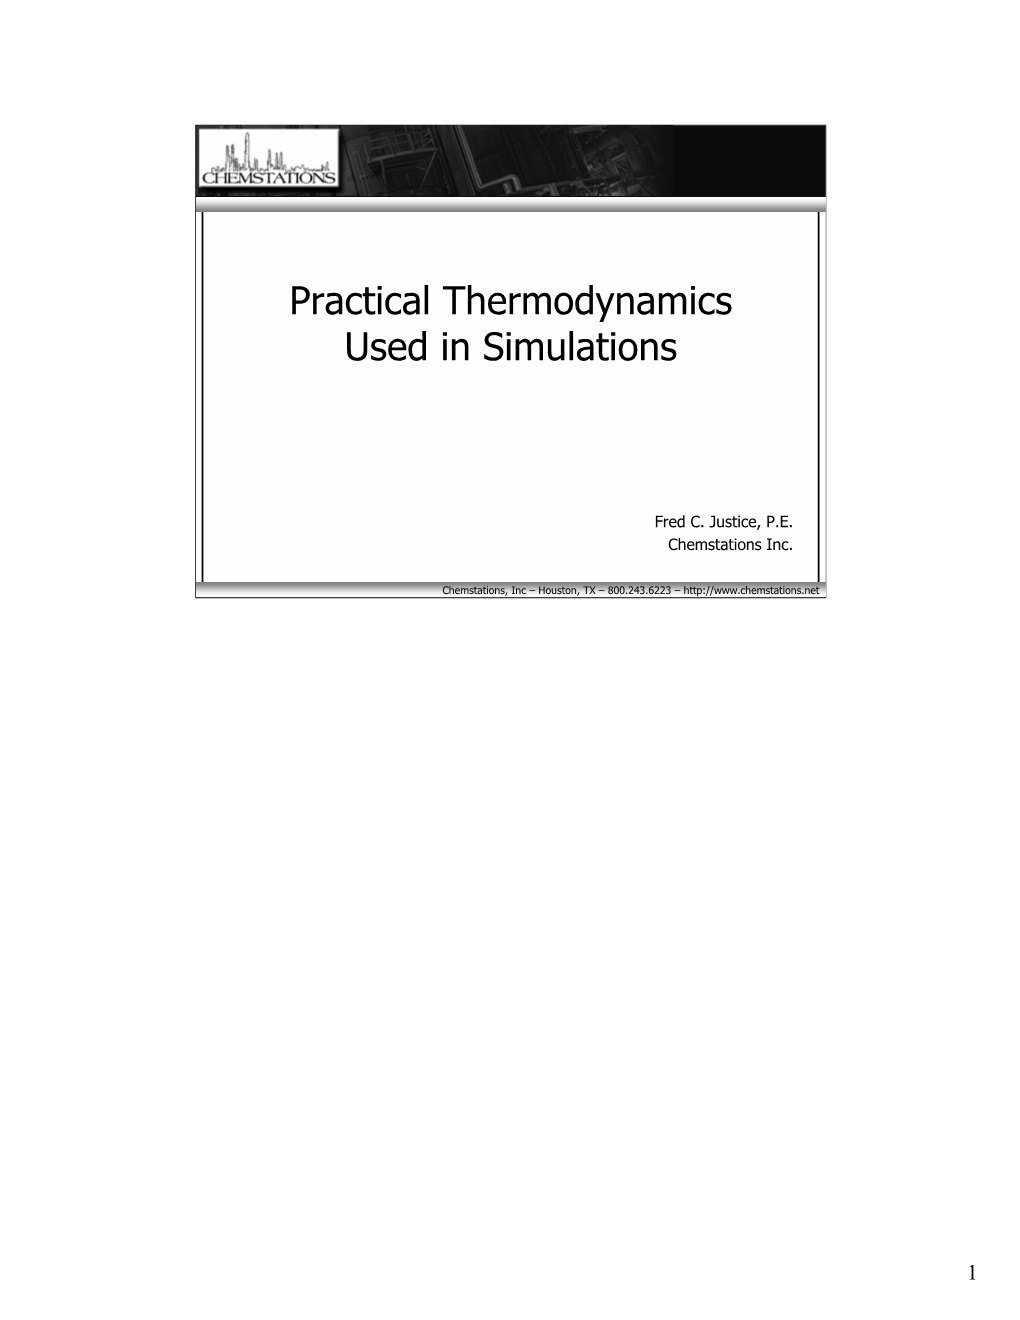 Practical Thermodynamics Used in Simulations